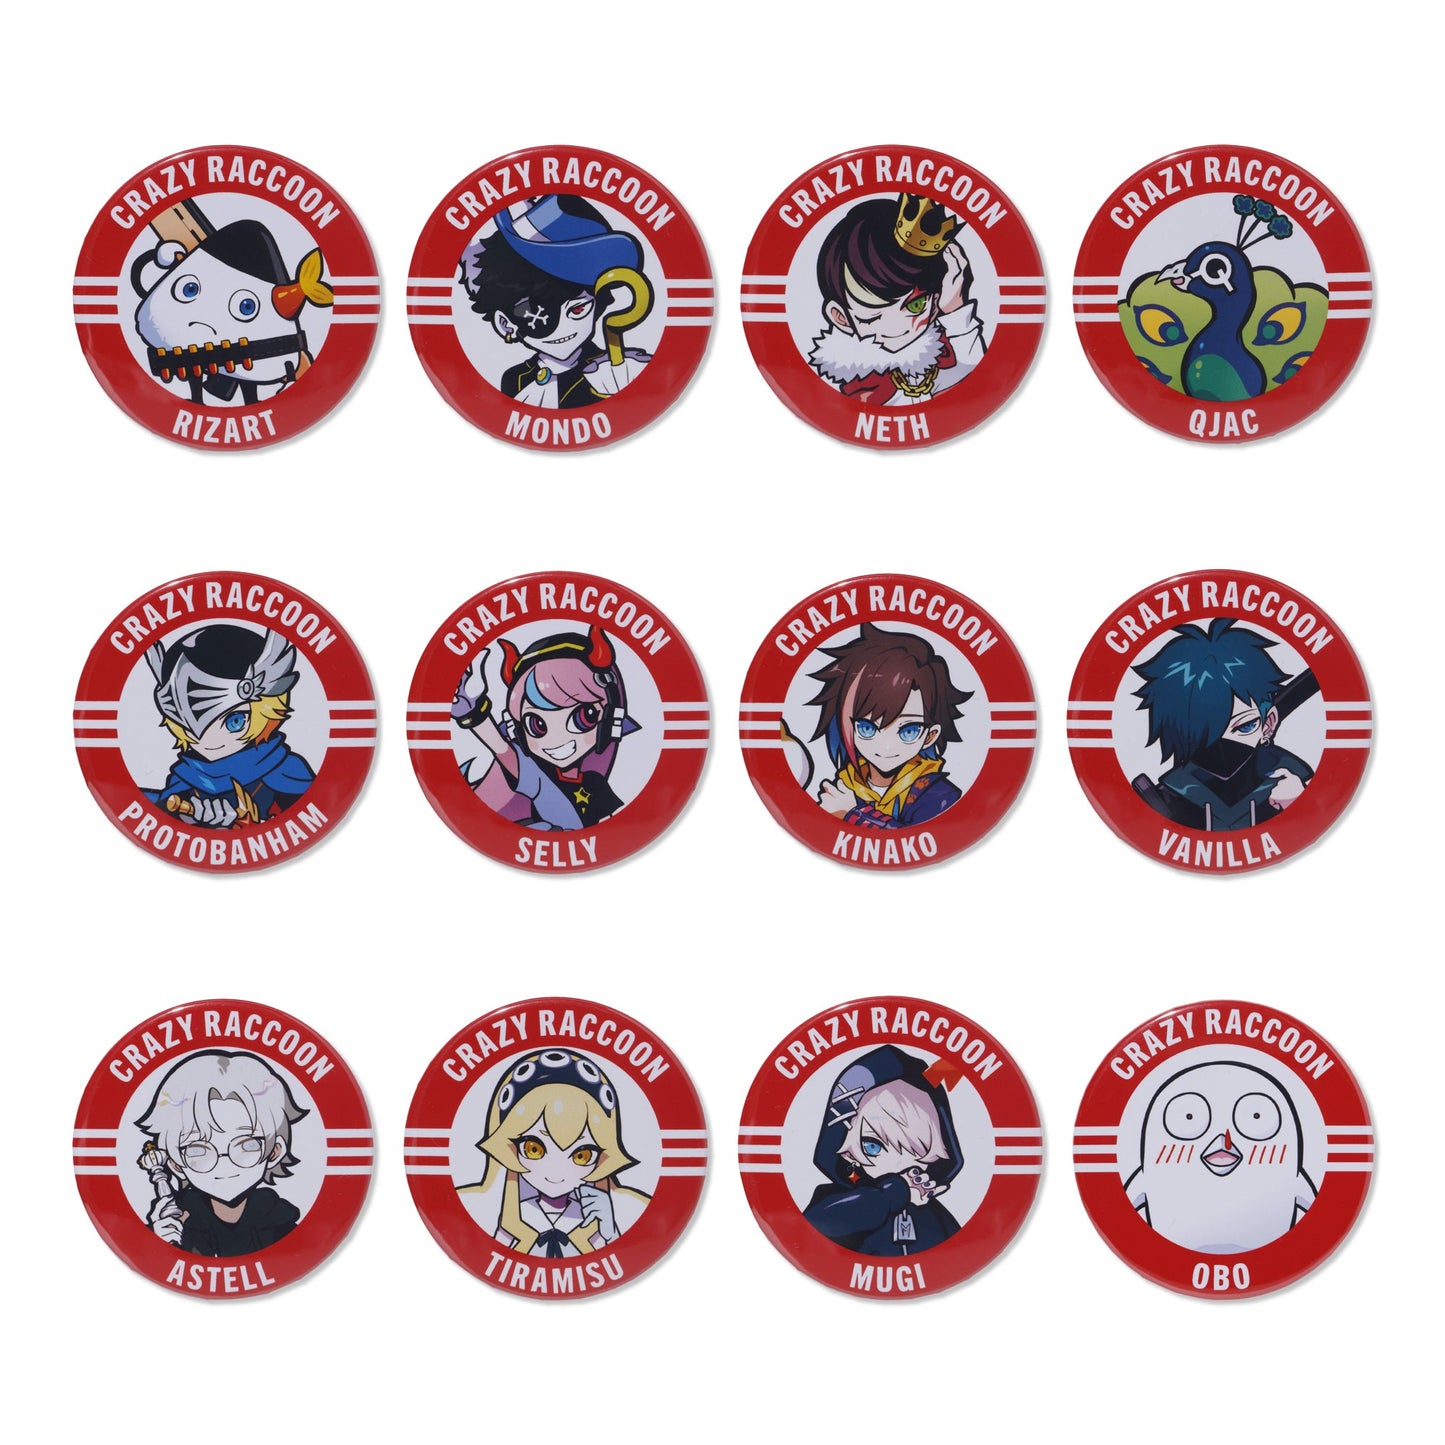 
                  
                    MEMBER CAN BADGE & STICKERS SET 3
                  
                